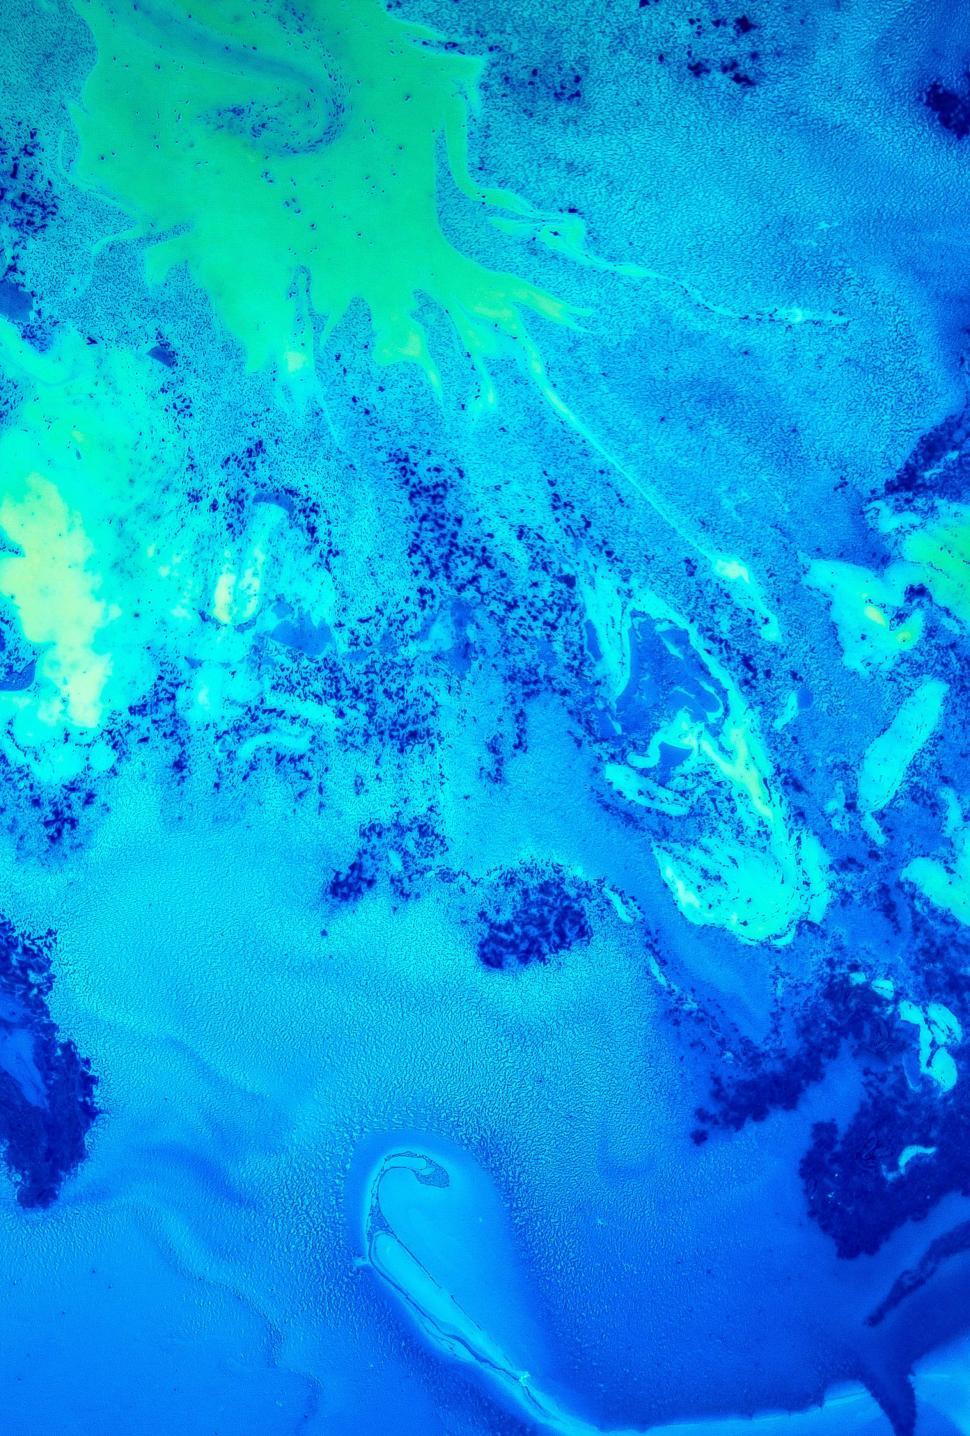 Free Image of Close Up of Blue and Yellow Substance 